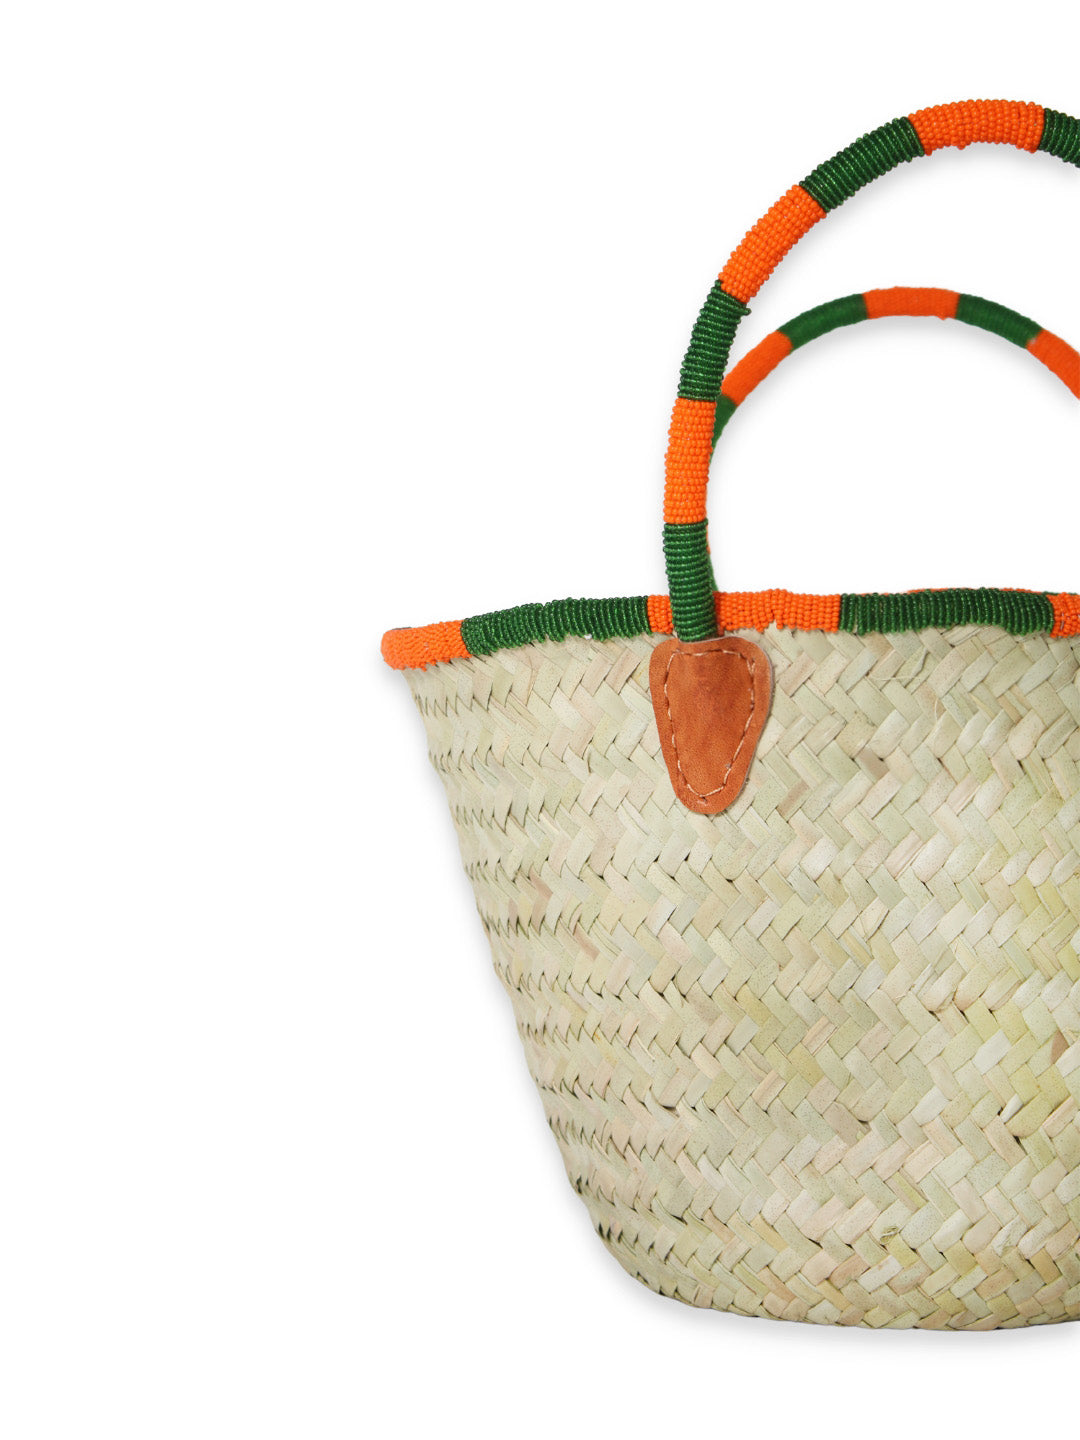 Classic hand-woven straw bags are as romantic as they are functional. With a roomy interior to easily hold all your essentials it brings resort vibes to any look during the summer. A fun touch with colourful beads makes it an instant favorite for warm beach days. Beaded basket, bag, summer basket, beach bag, fatto a mano, moda etica, borsa da spiaggia, cesta